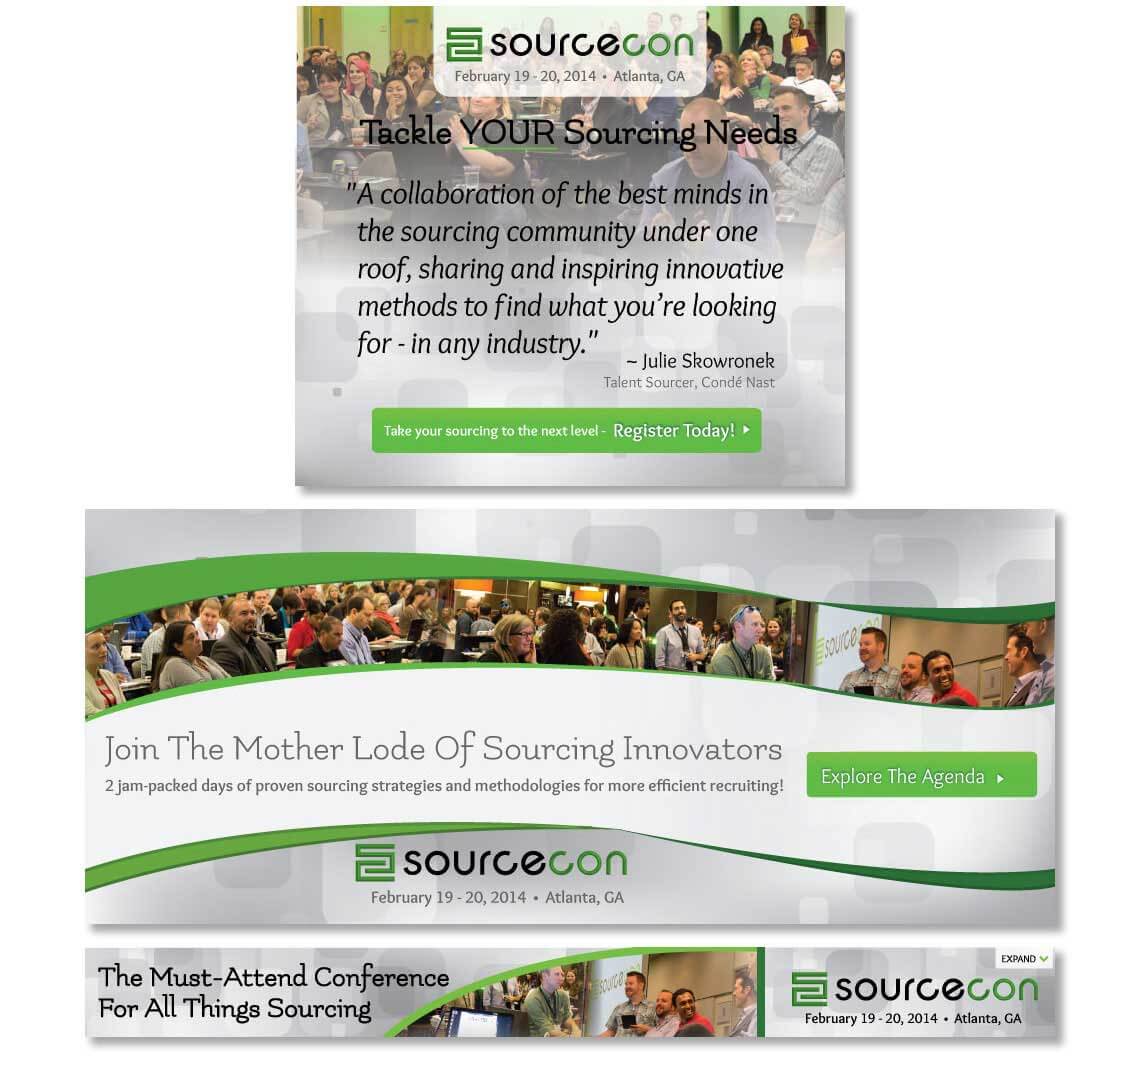 SourceCon Conference Ads